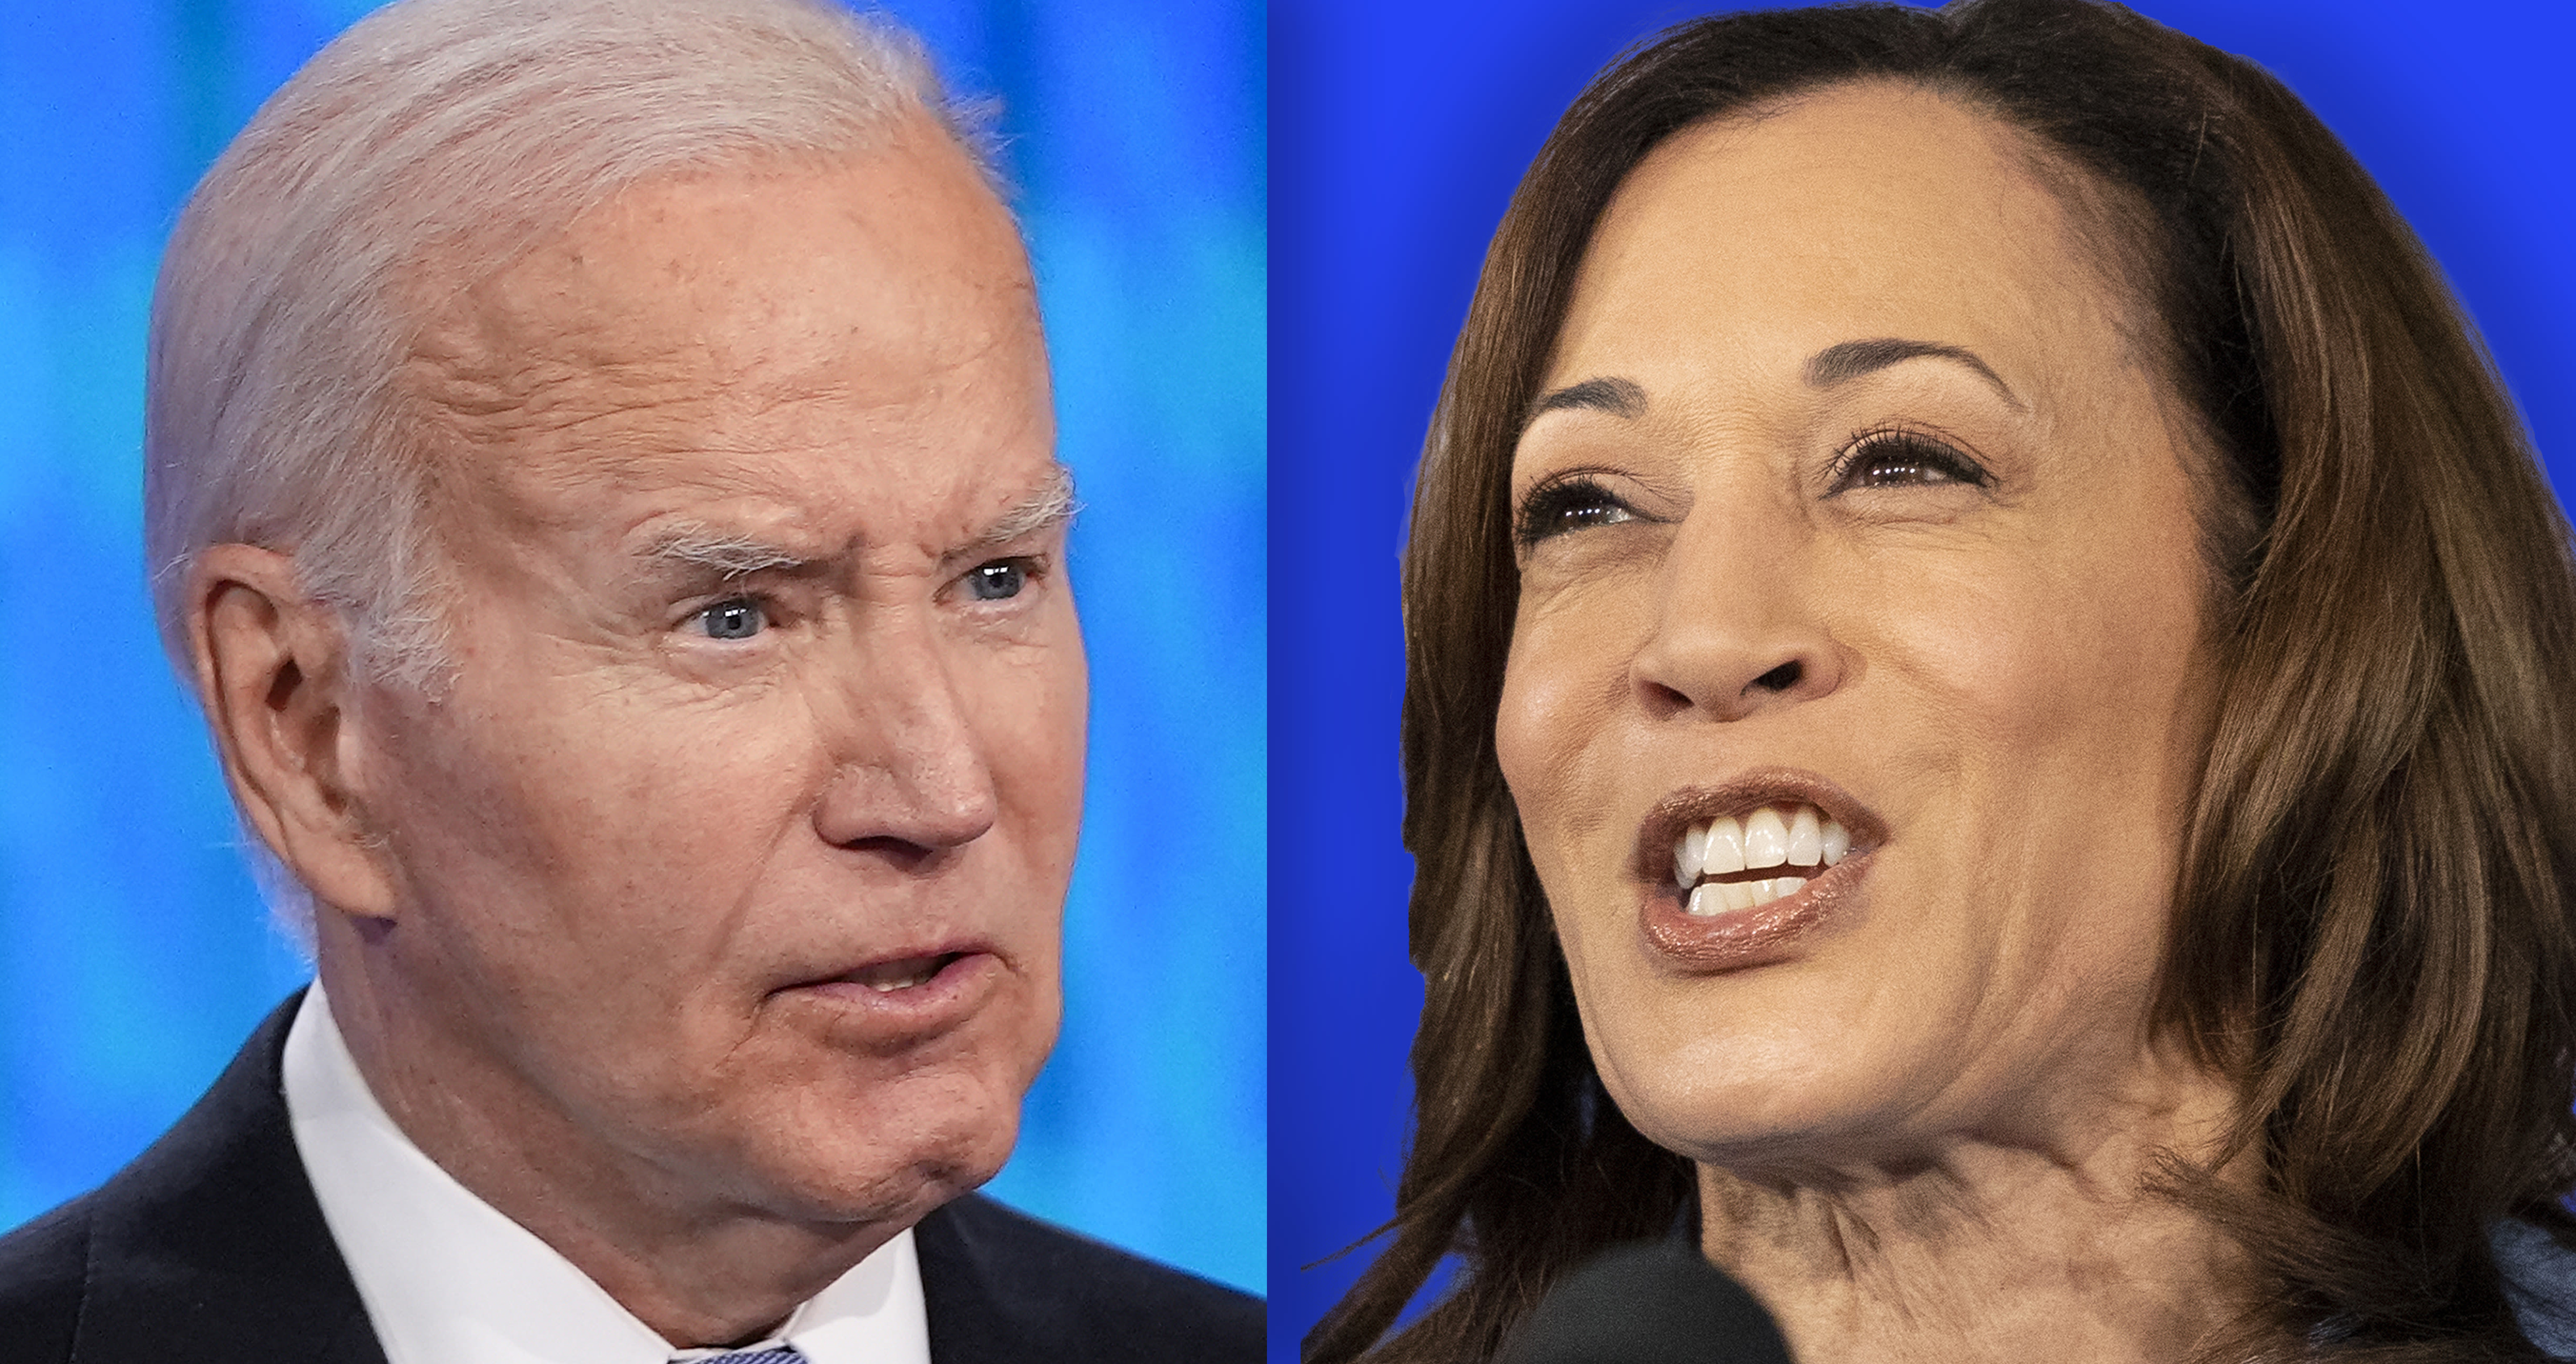 Who could replace Biden as the Democratic nominee?